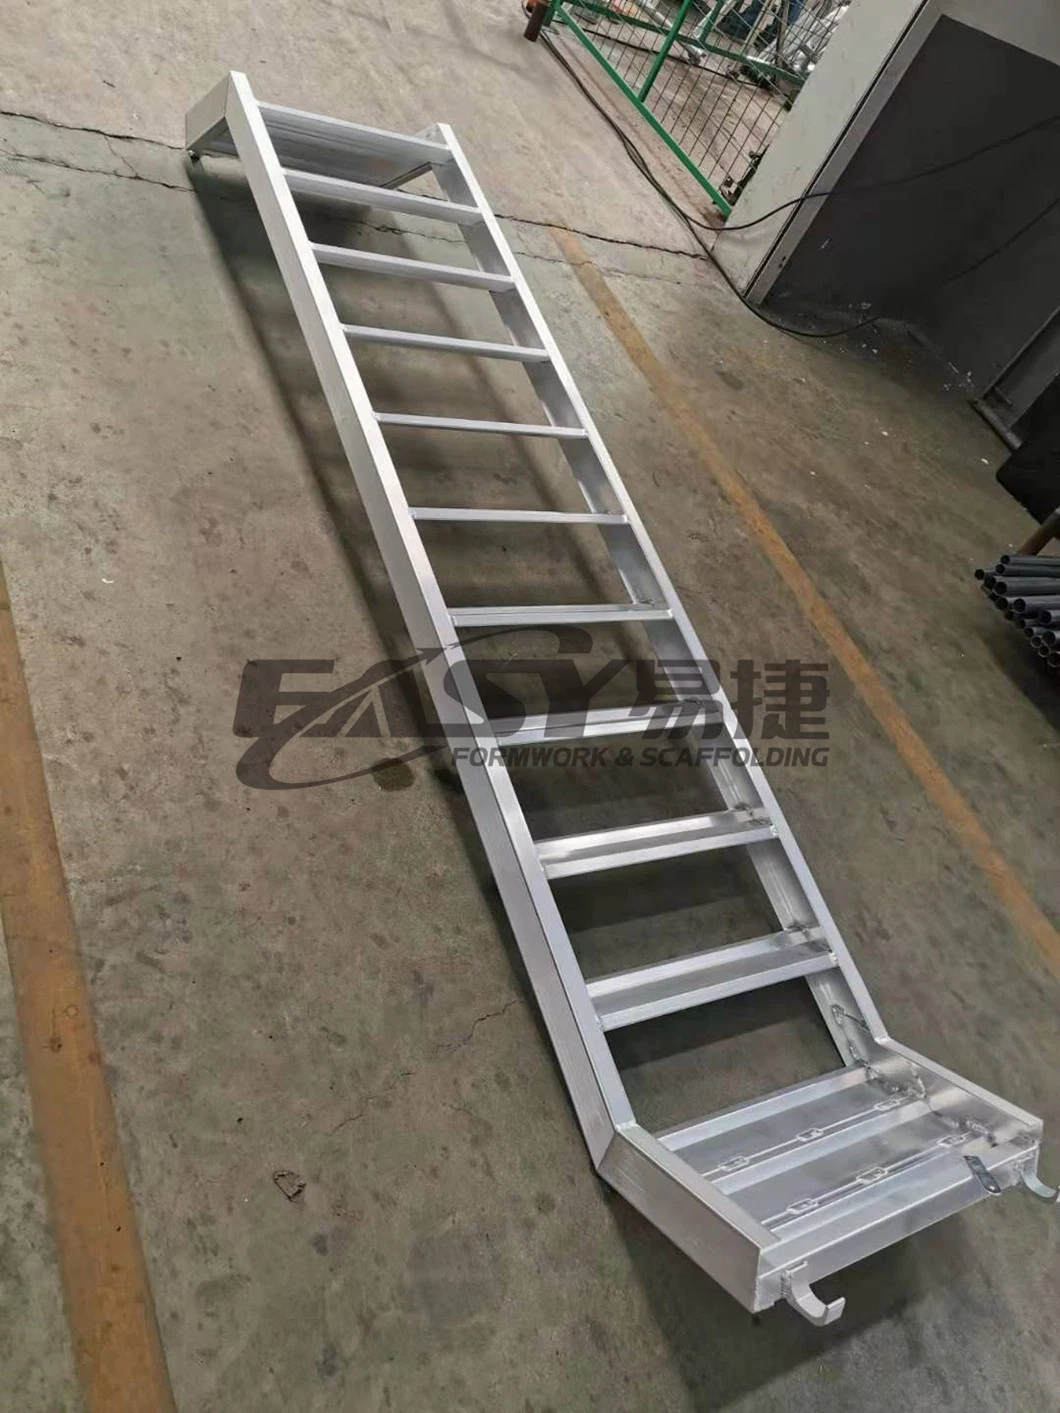 Easy Scaffolding Aluminm Steel Ringlock System Step Stair Ladder